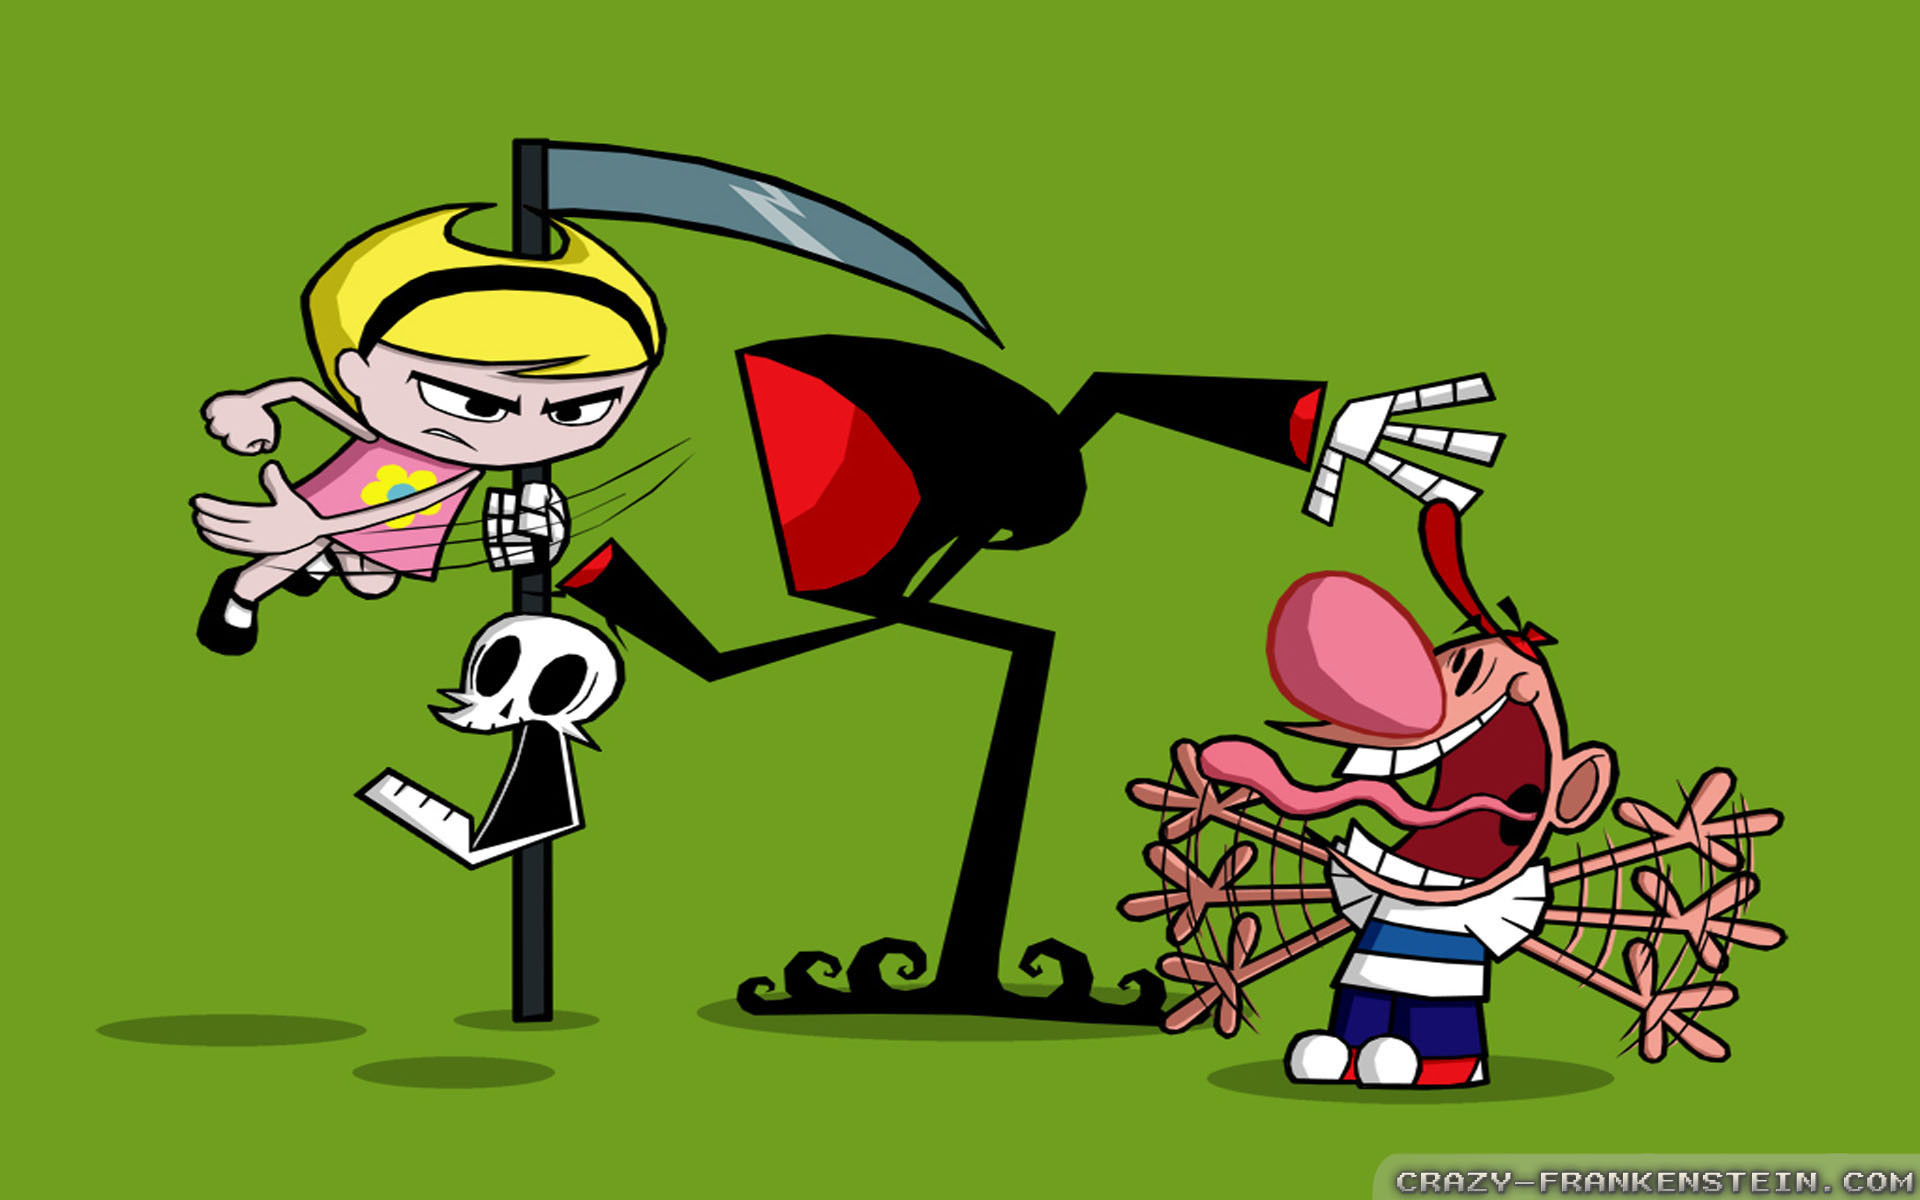 Spider from billy and mandy